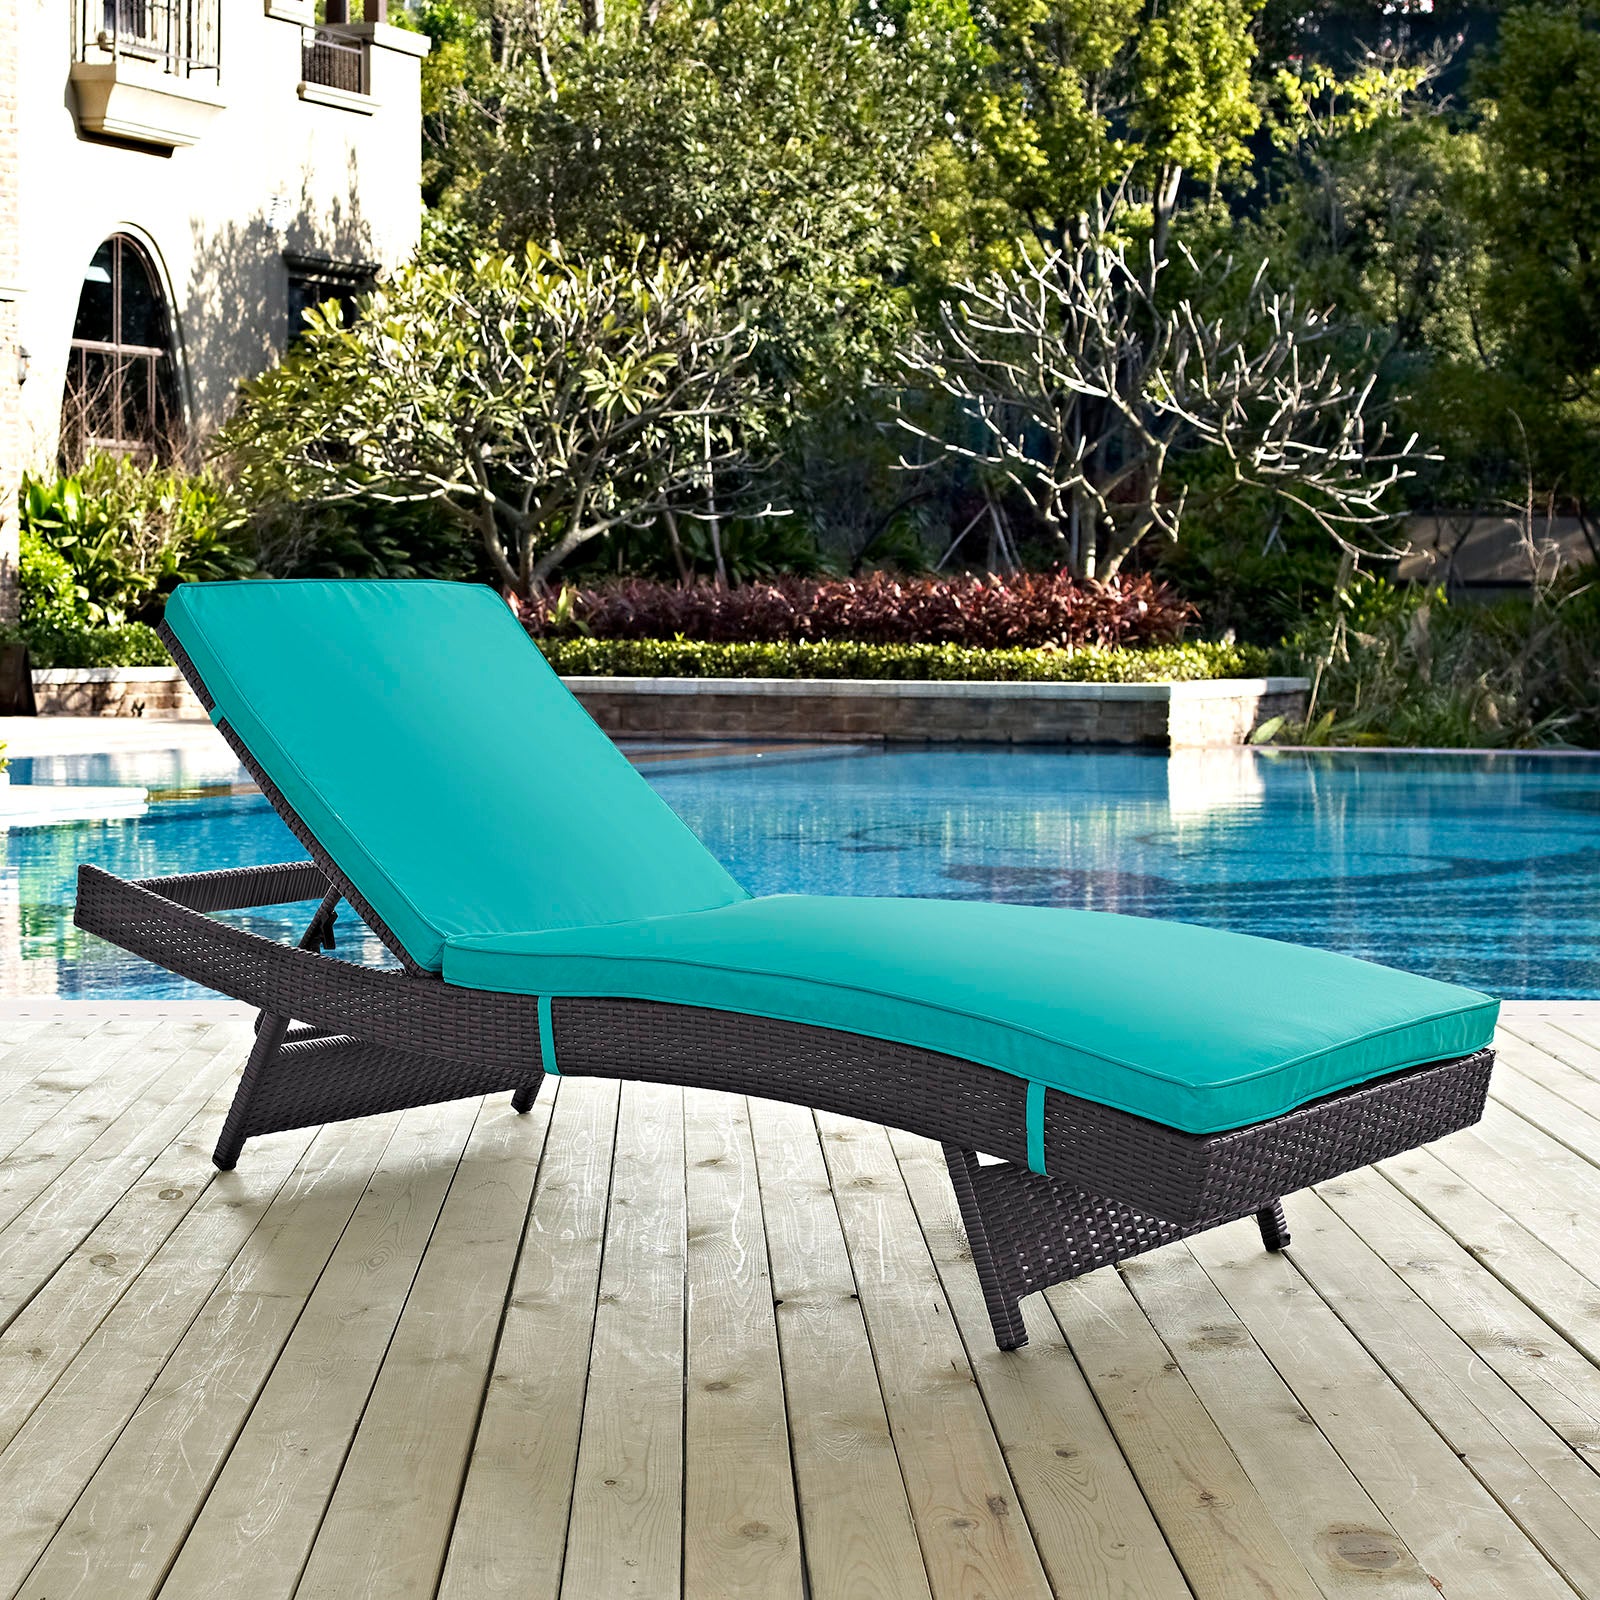 Modway Outdoor Loungers - Convene Outdoor Patio Chaise Espresso & Turquoise